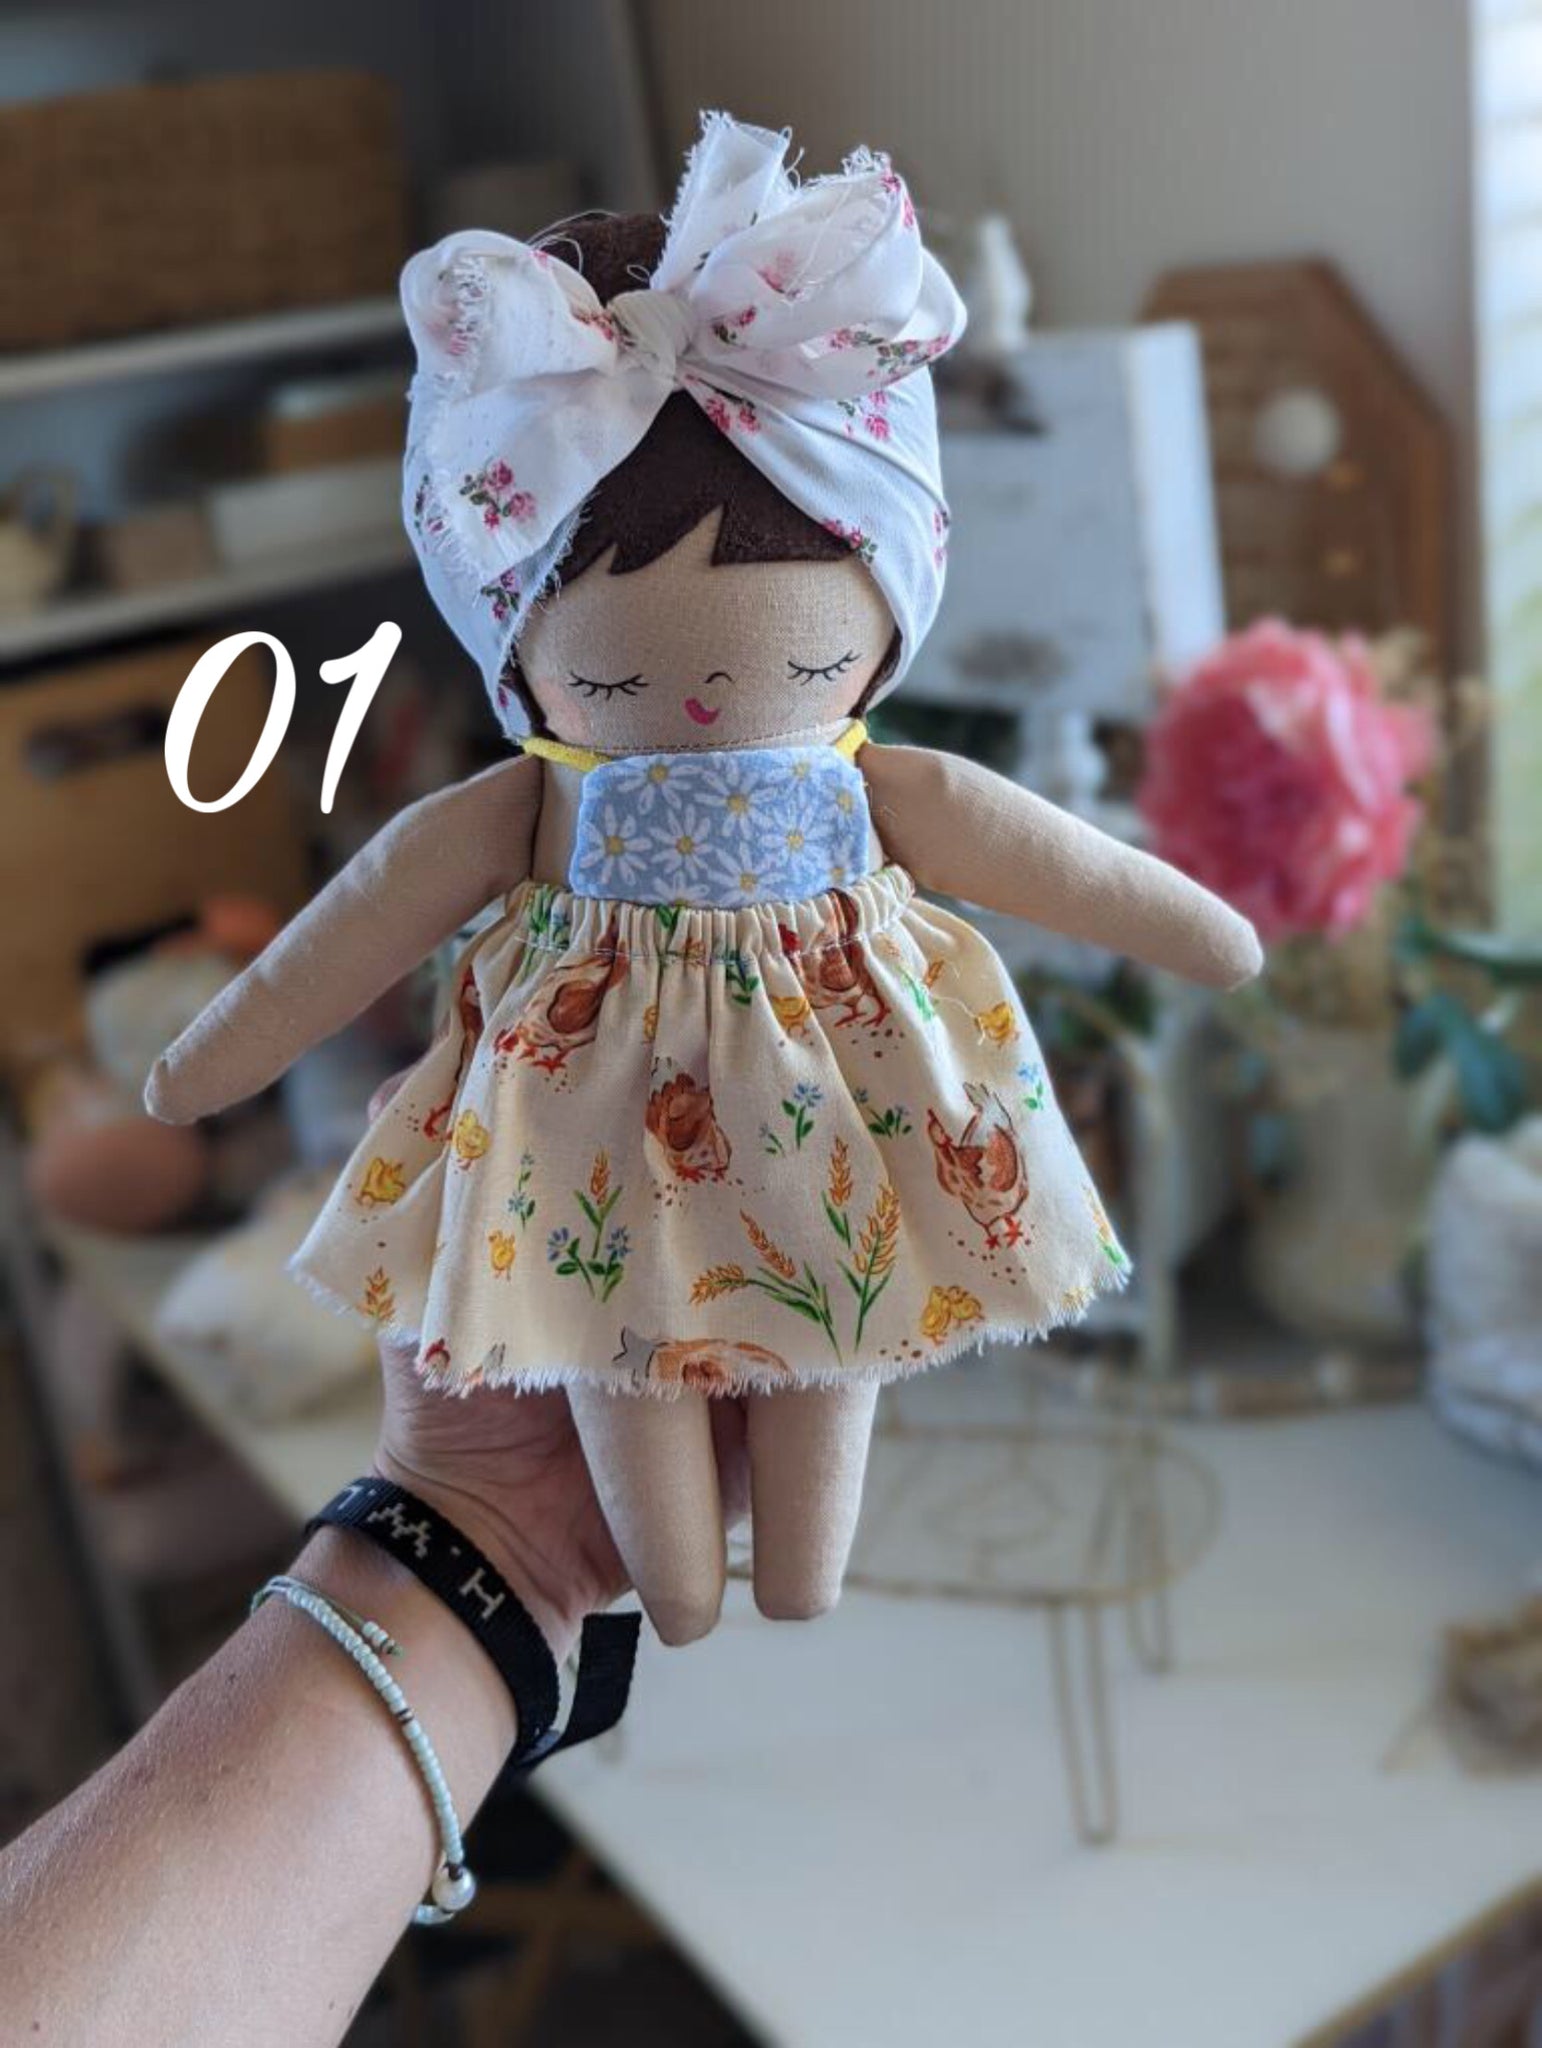 01 Small baby doll, soft children toys, Easter collection 01